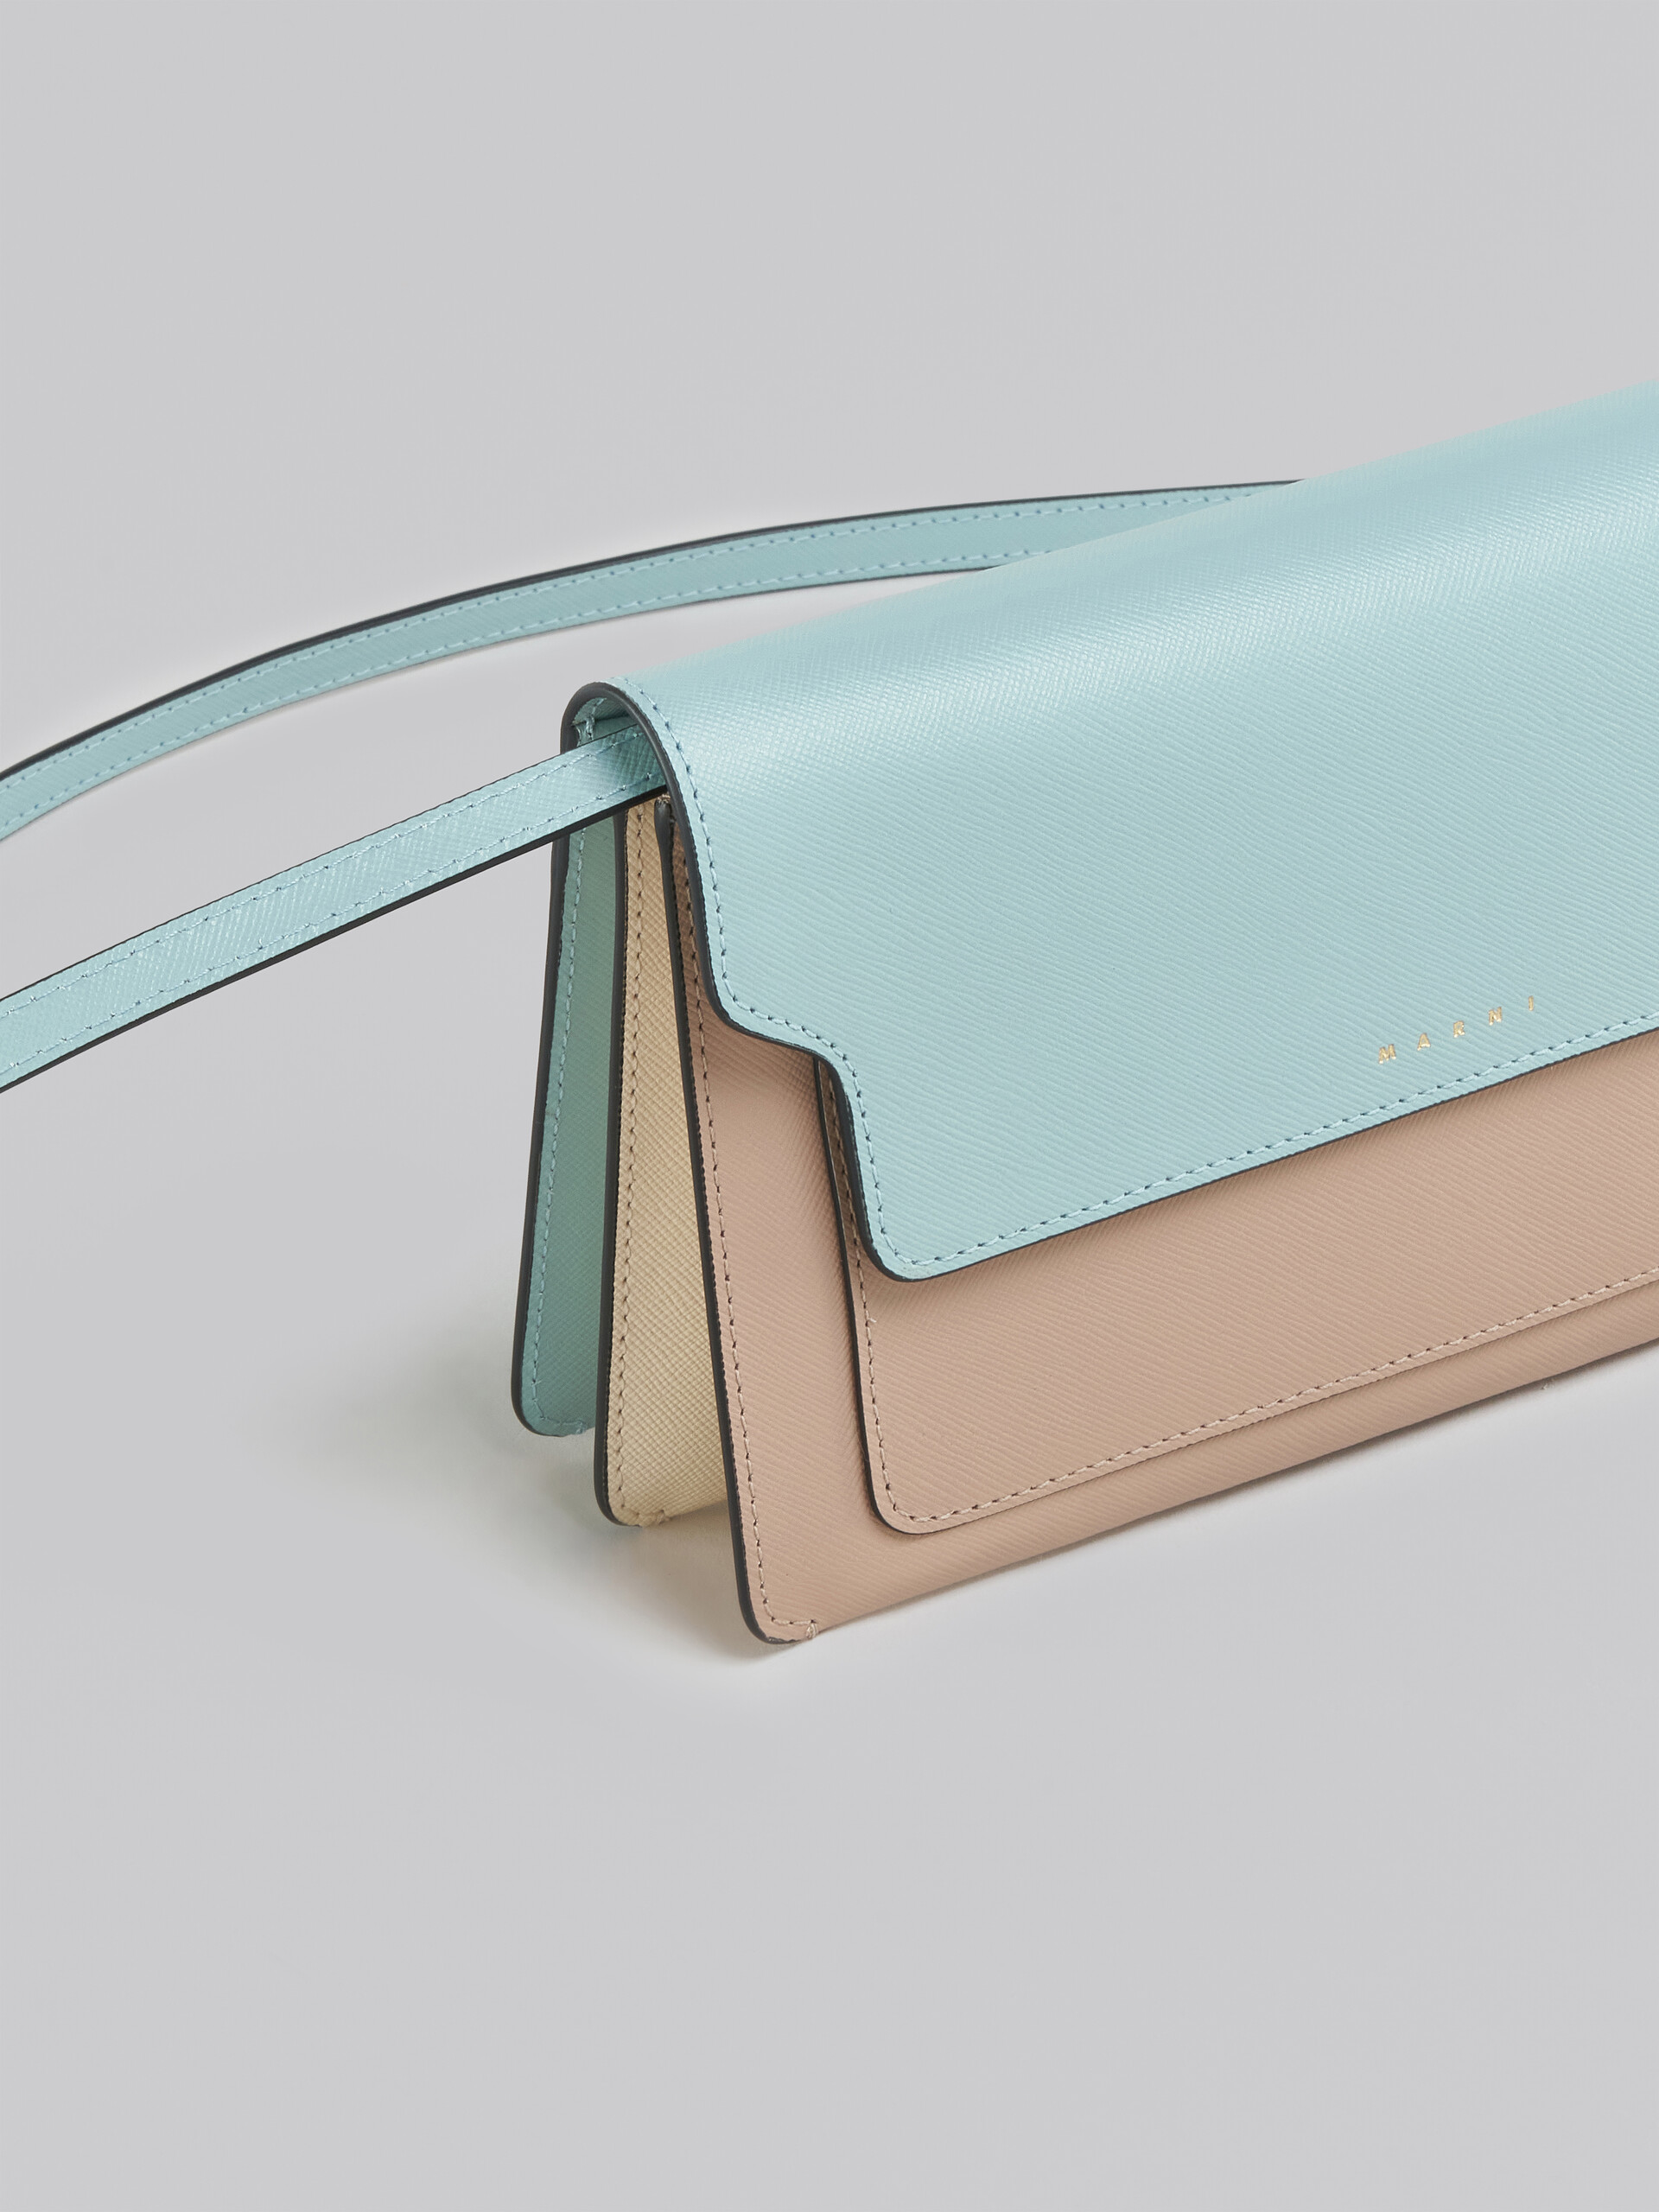 Trunk Clutch in light blue beige and white saffiano leather - Pochette - Image 5